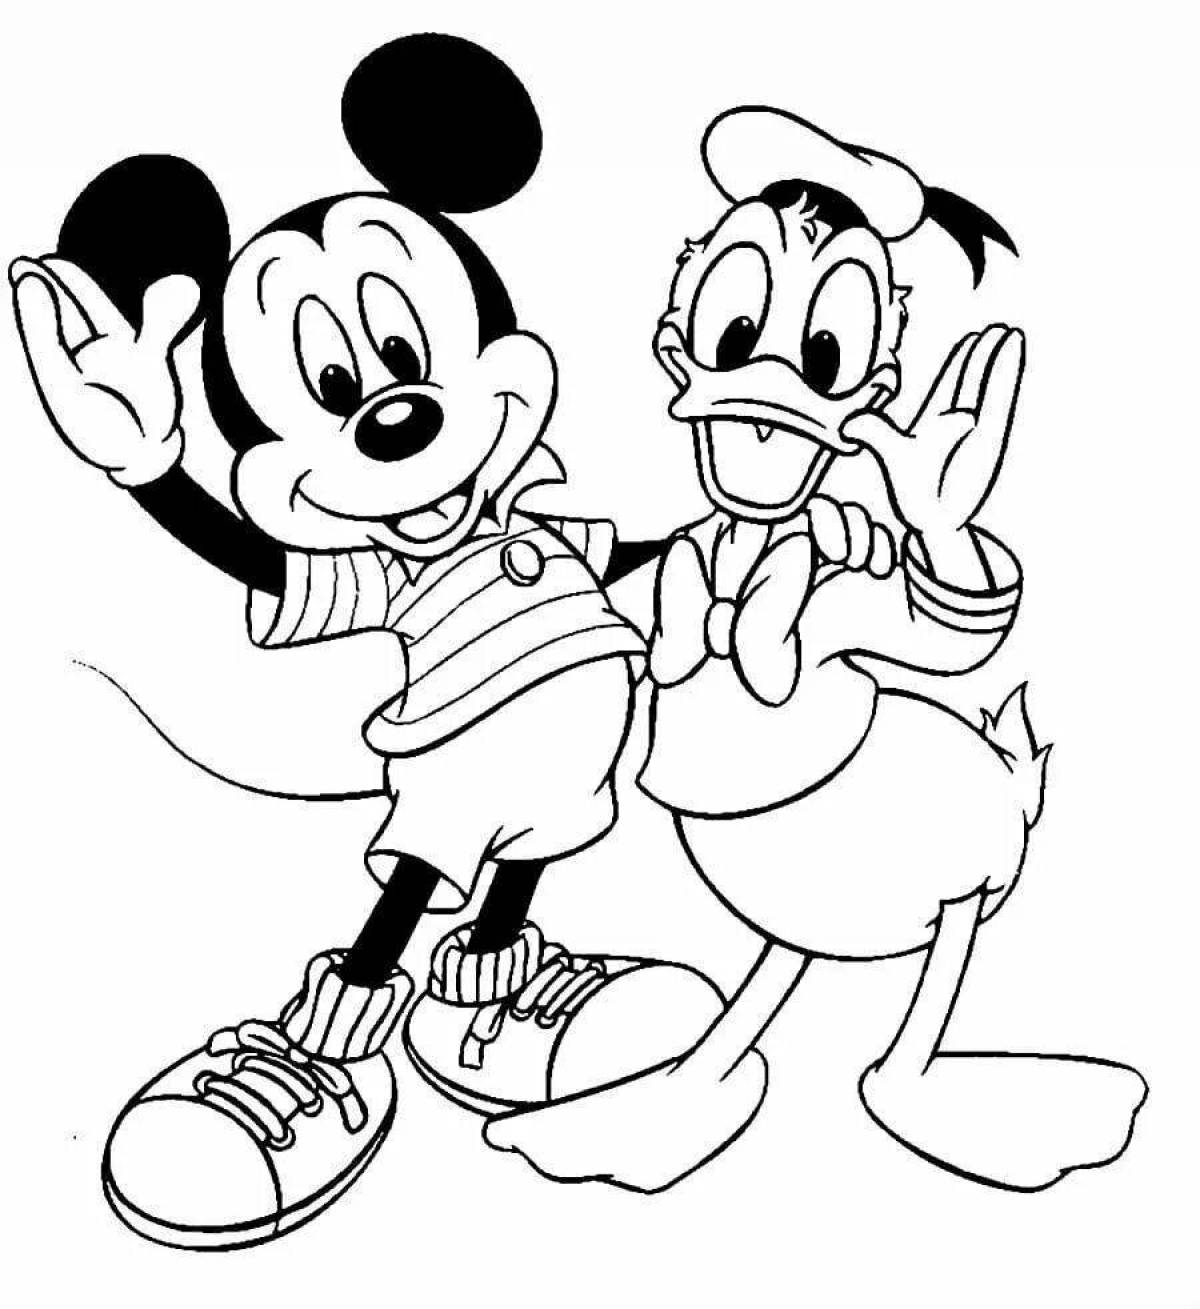 Fabulous disney character coloring pages